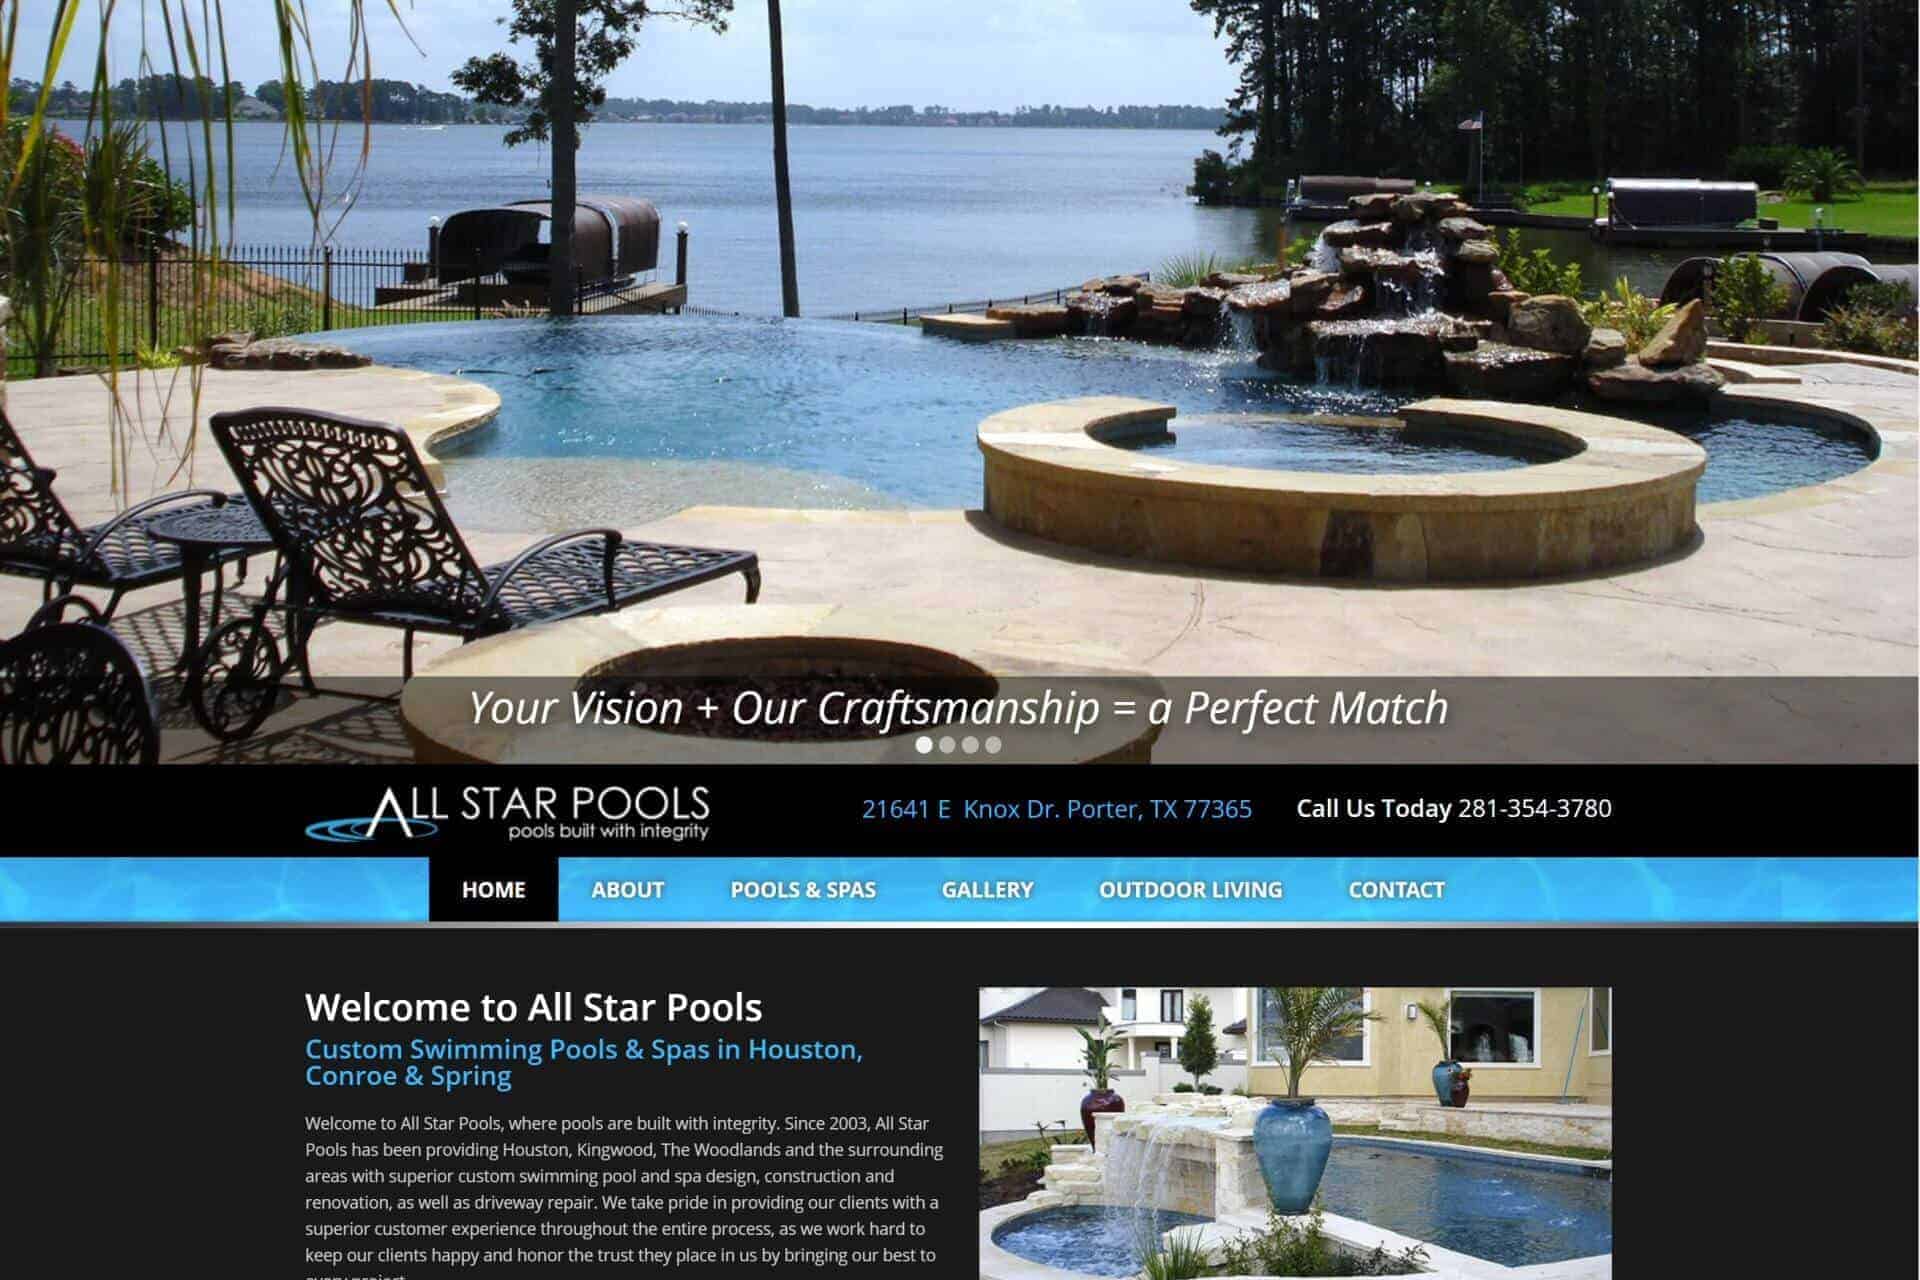 All Star Pools by Oxydrate